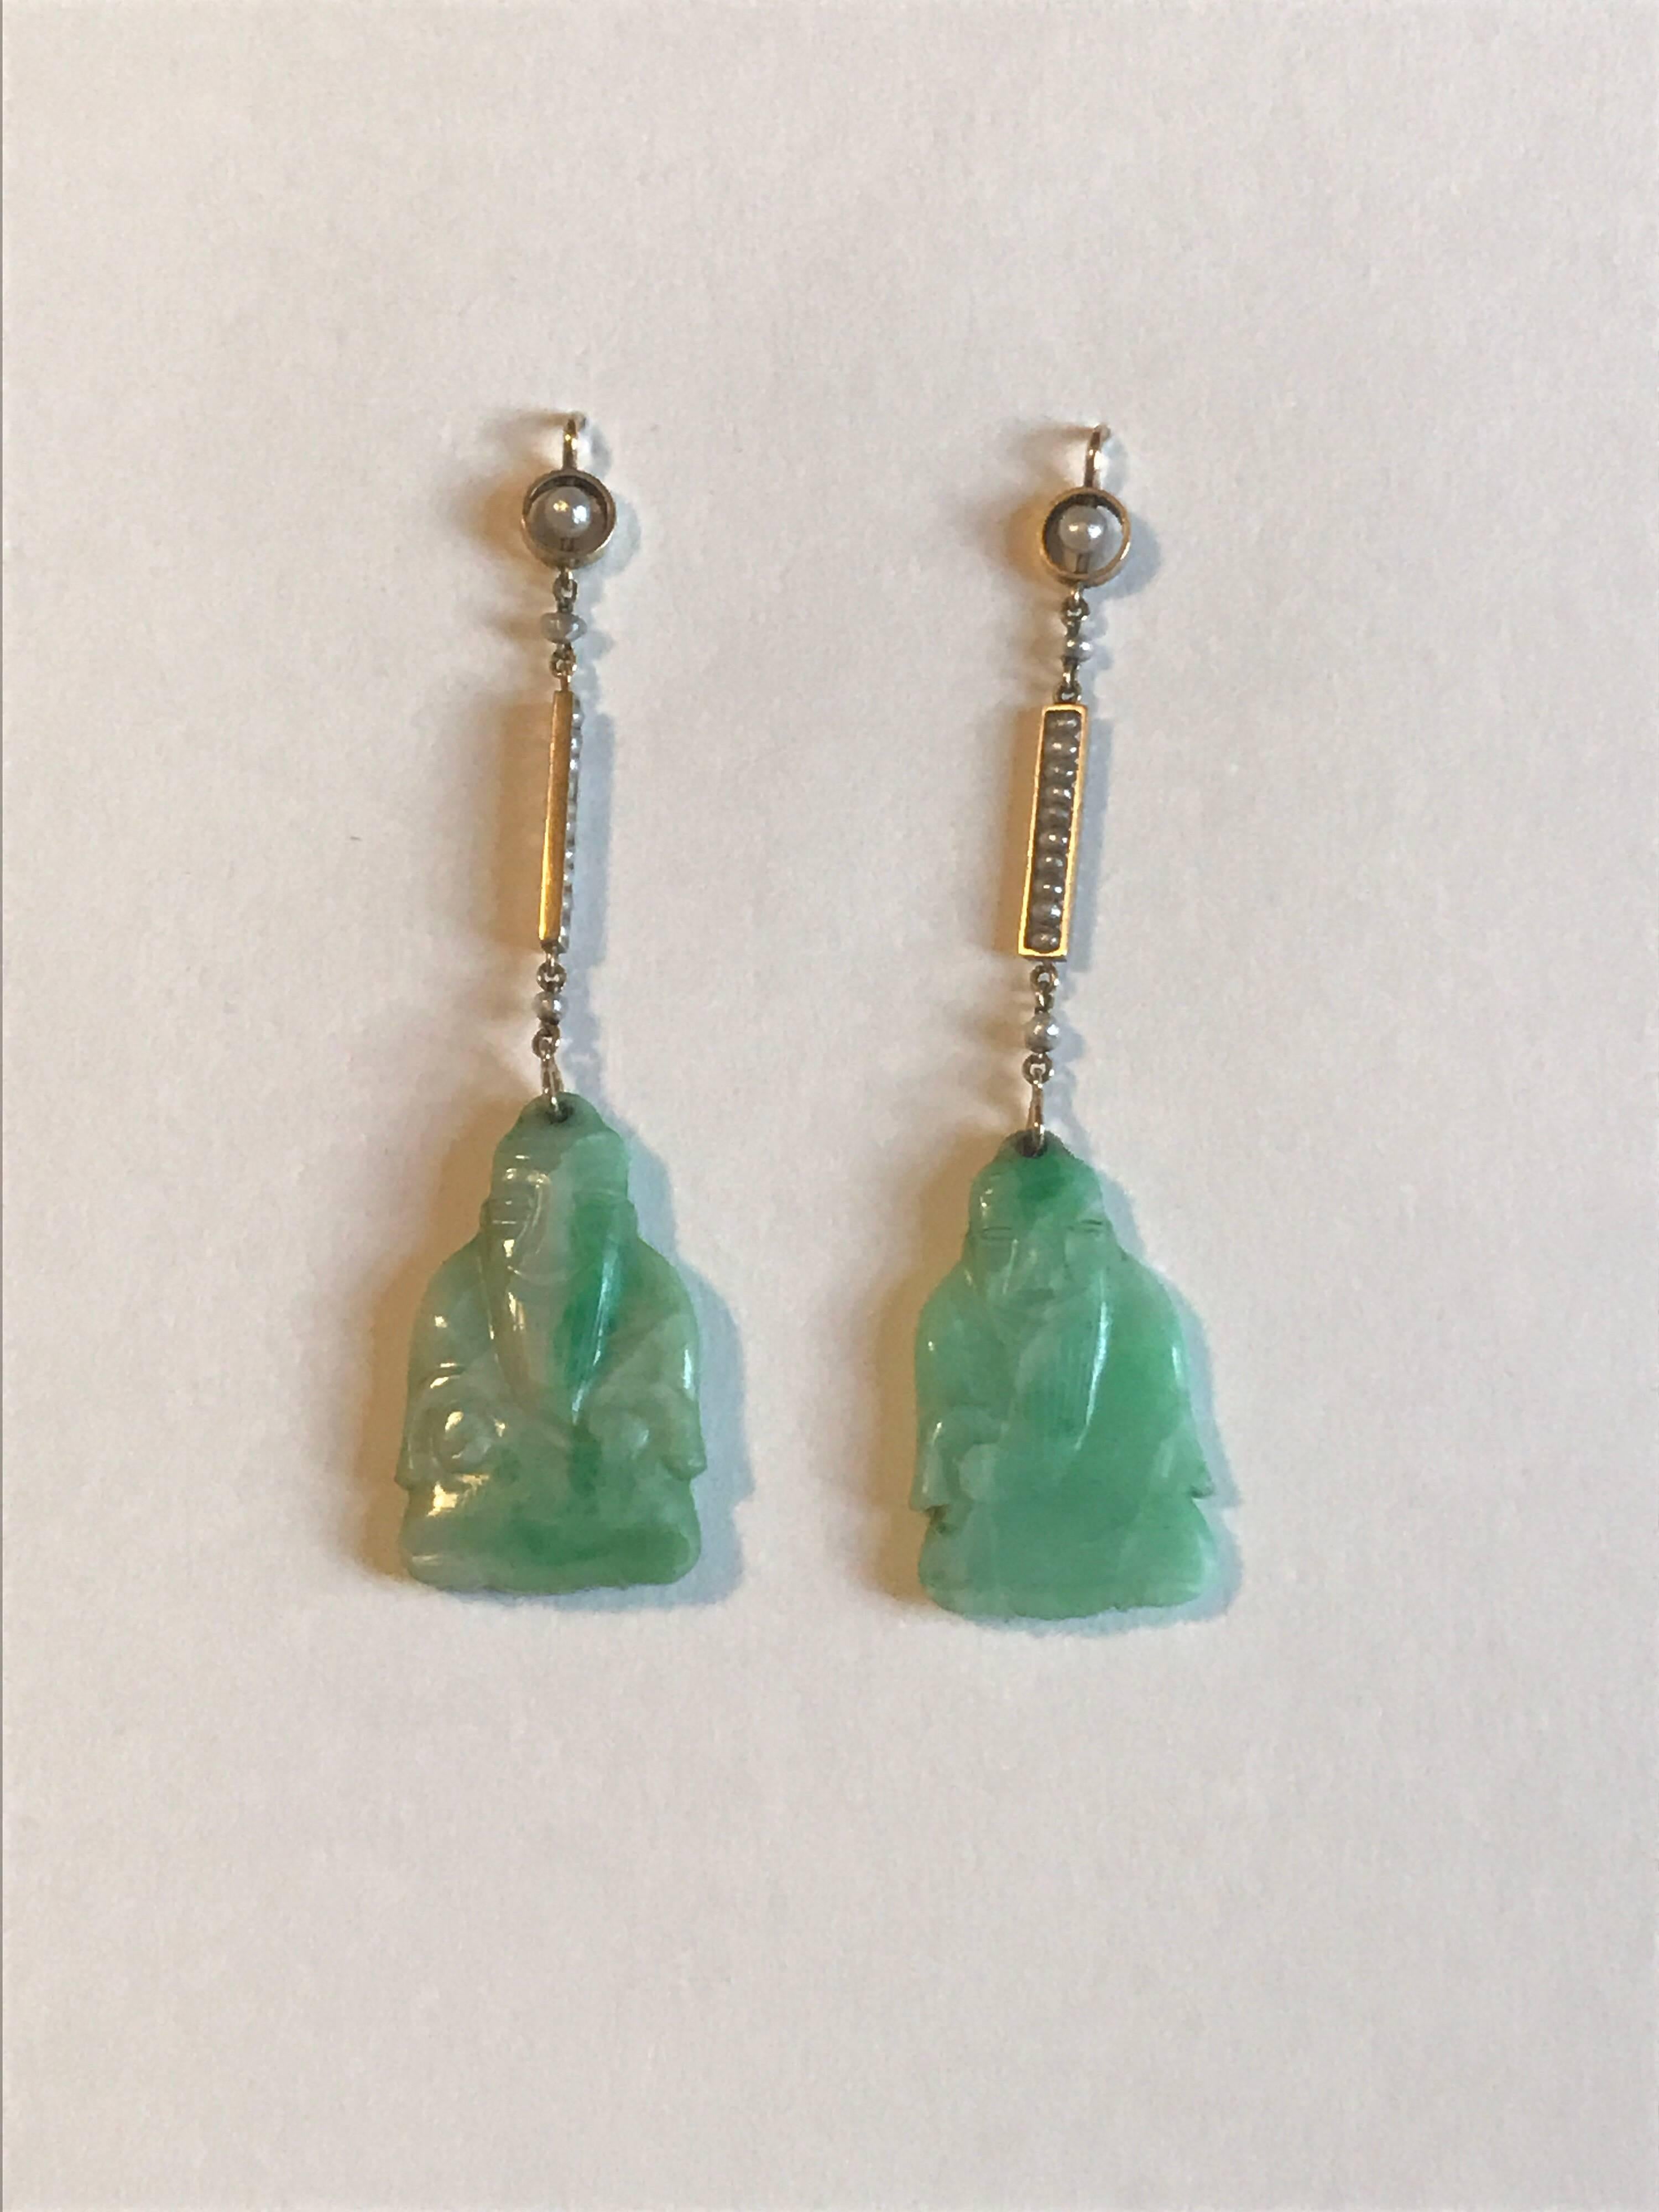 A pair of natural jade and natural seed pearl Art Deco period Buddha earrings set in hallmarked 15ct gold.  These are original art deco earrings which are in very good antique condition. There are no chips or cracks and the pearls are in good